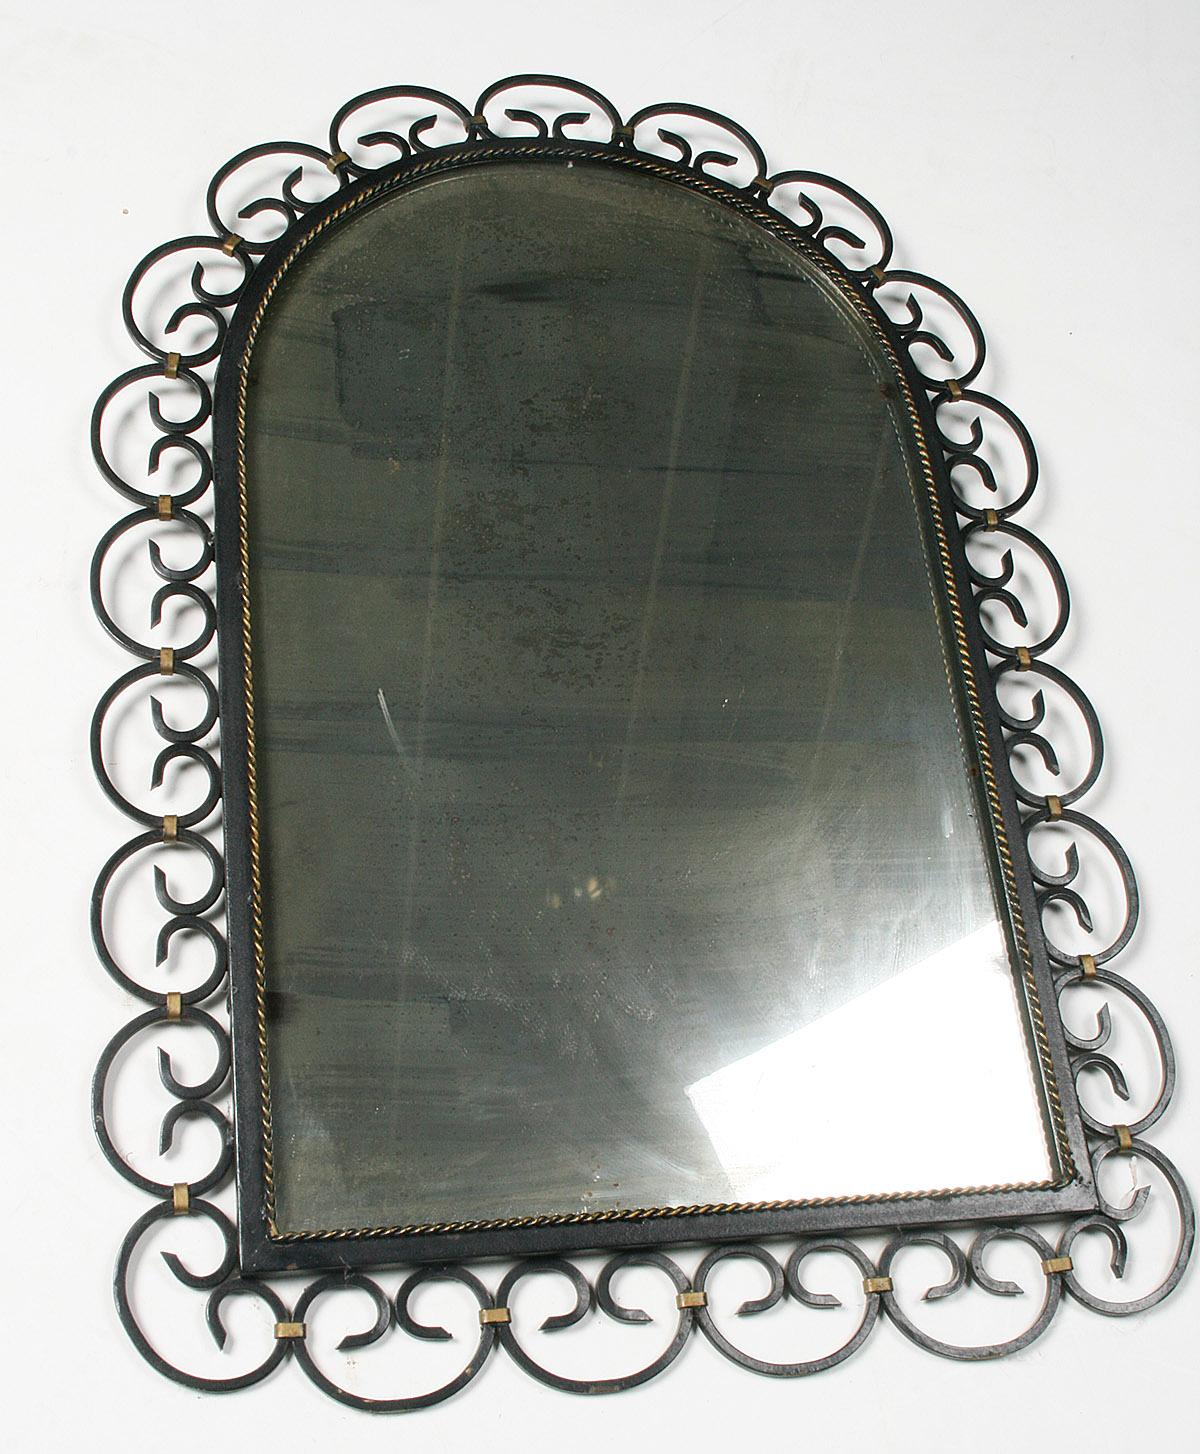 Hand-Crafted Mid-20th Century Design Mirror with Wrought Iron Frame